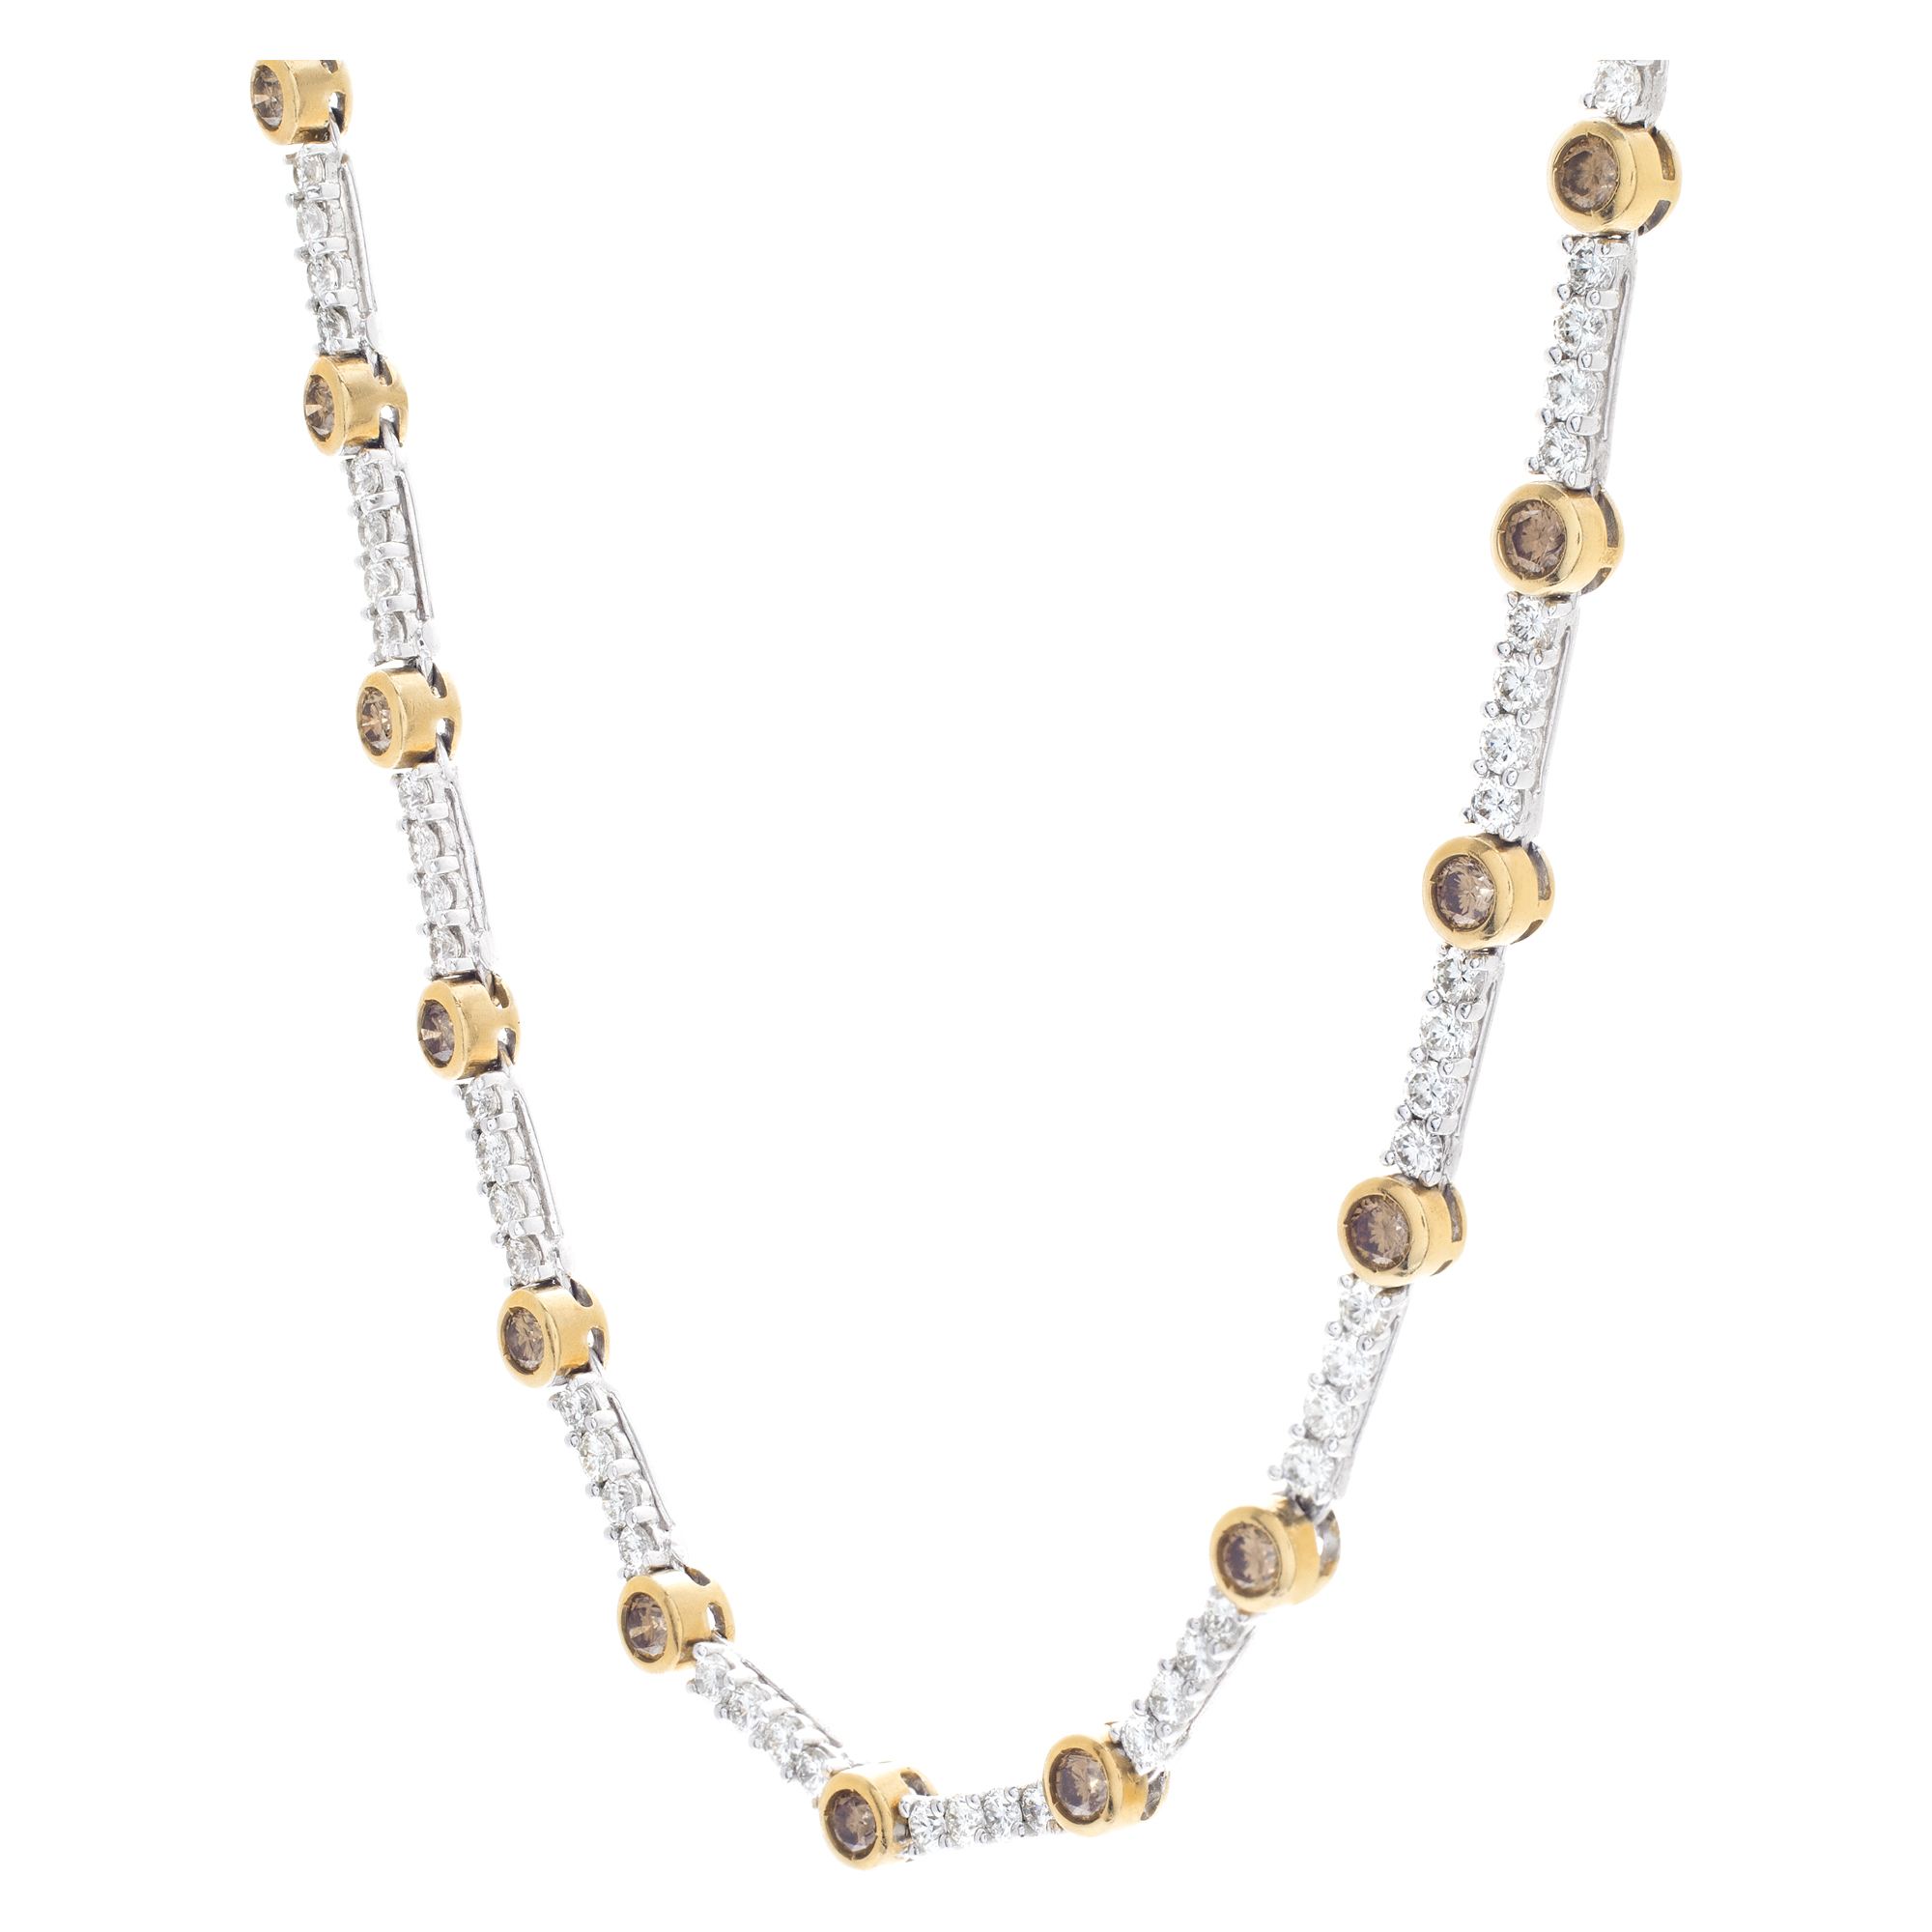 Stunning 18k white and yellow gold necklace with white and yellow diamonds image 4